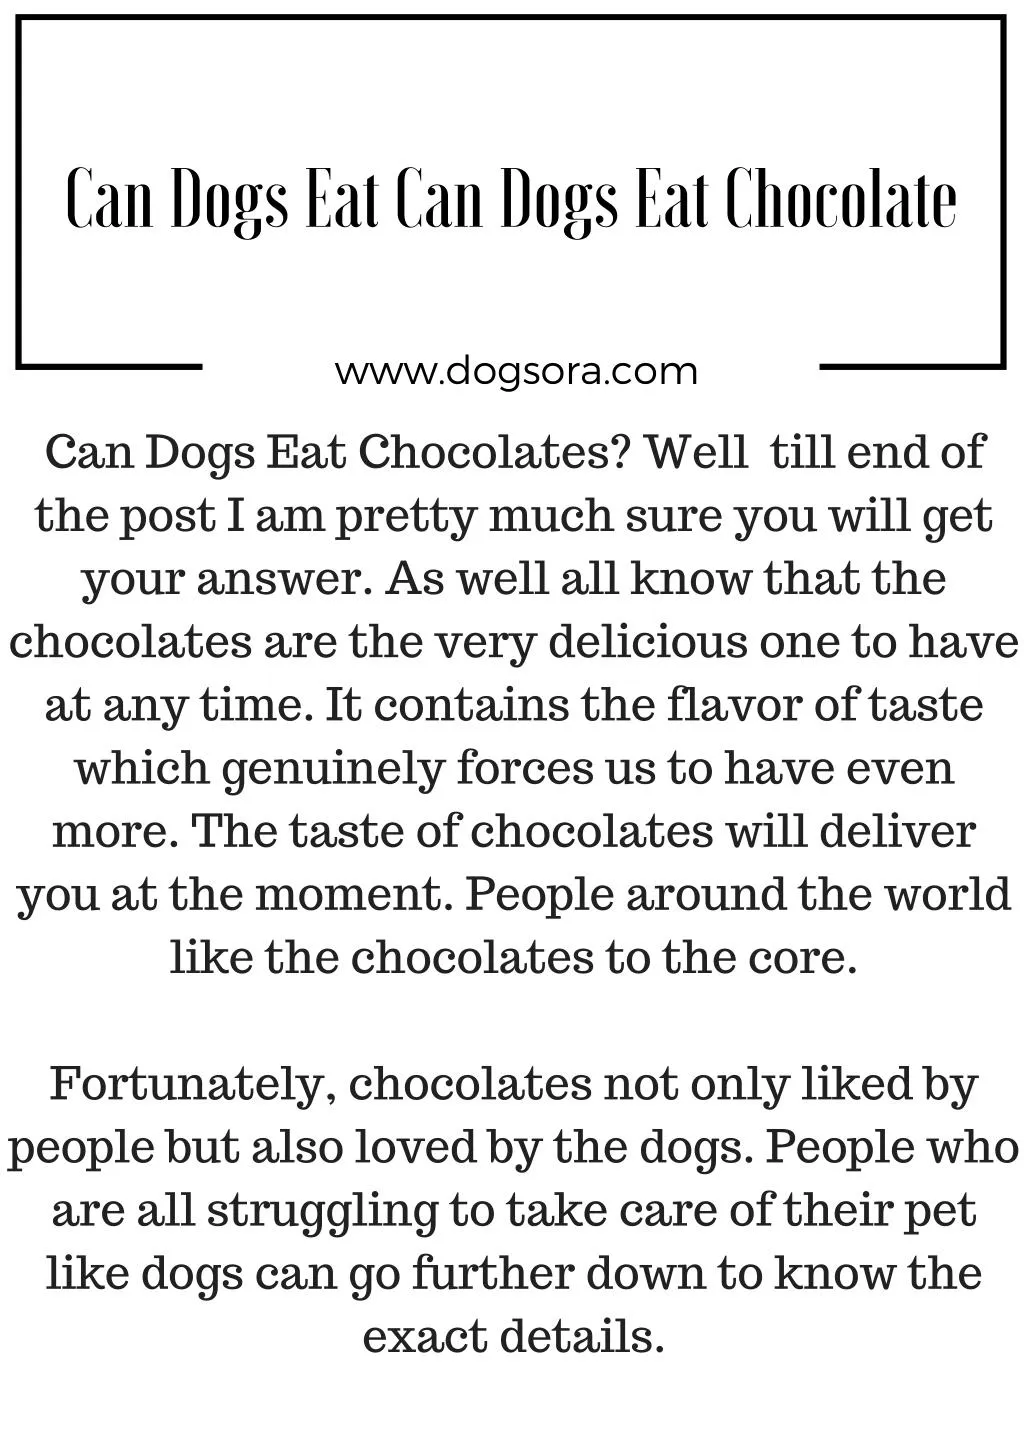 can dogs ea t can dogs ea t chocola t e